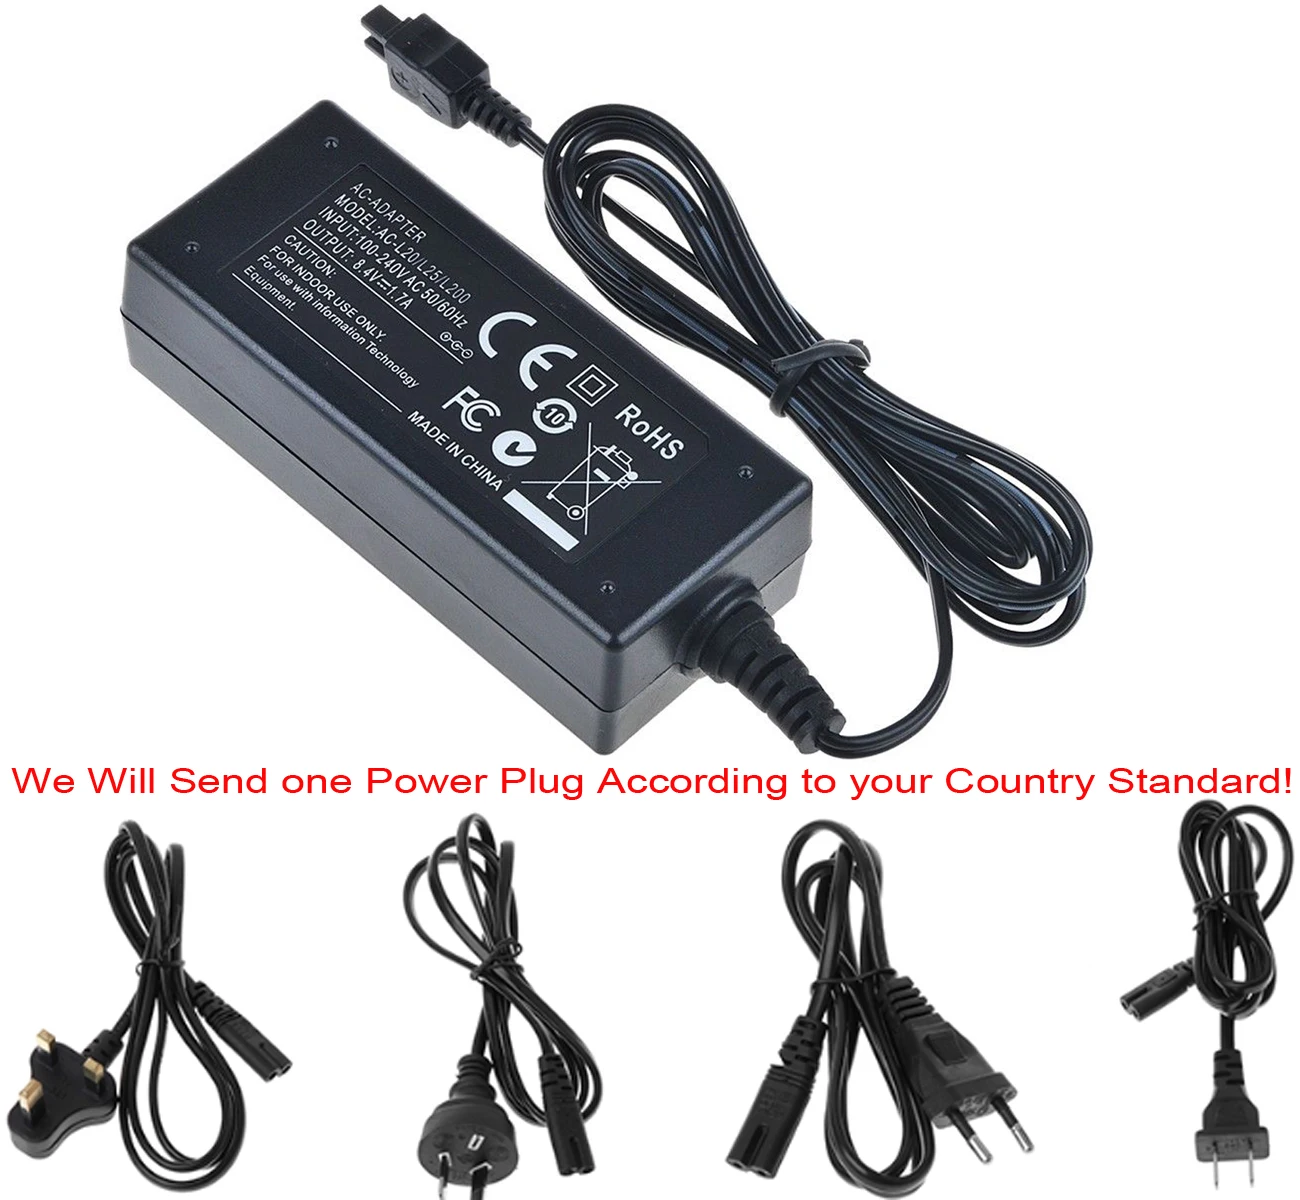 AC Power Adapter Charger for Sony HDR-SR10 HDR-SR11 HDR-SR12 Handycam Camcorder 